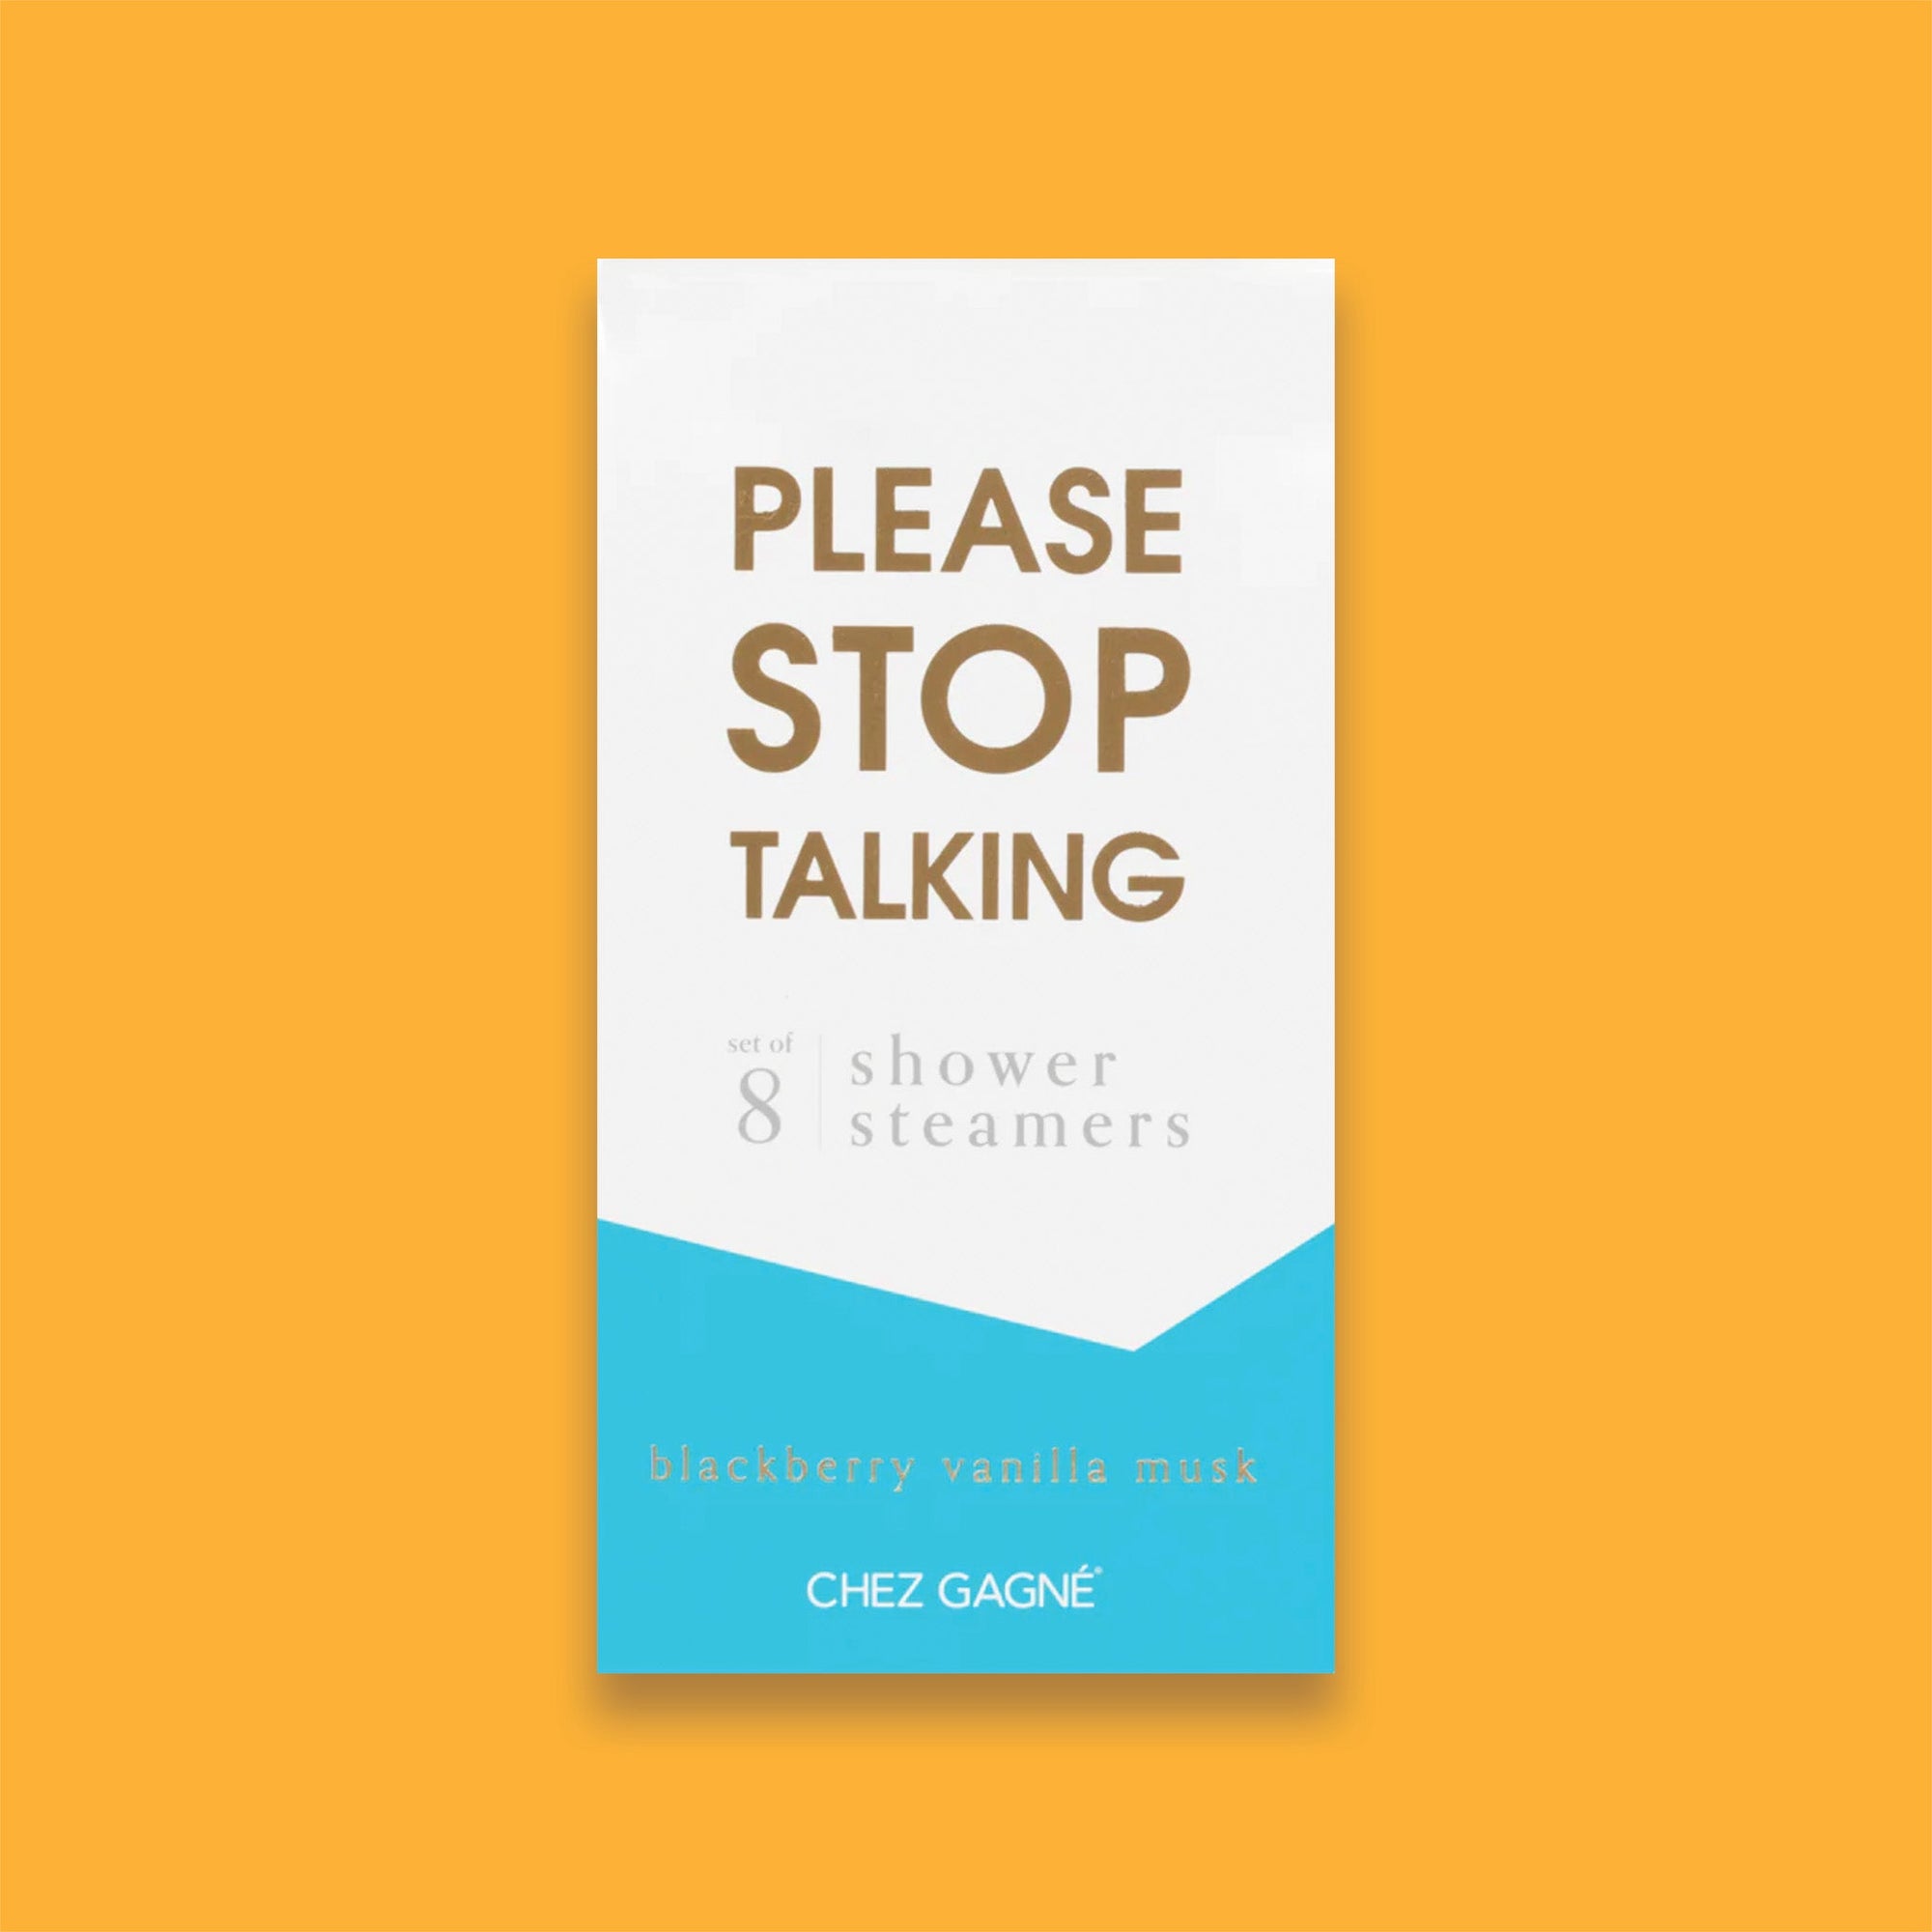 On a sunny mustard background sits a box. This picture is a close-up of a white and pacific blue package that says "PLEASE STOP TALKING" in gold foil, all caps block lettering. Under it says "set of 8" and " shower steamers" in grey, lowercase serif font. At the bottom it says "blackberry vanilla musk" in gold foil, lower case serif font.